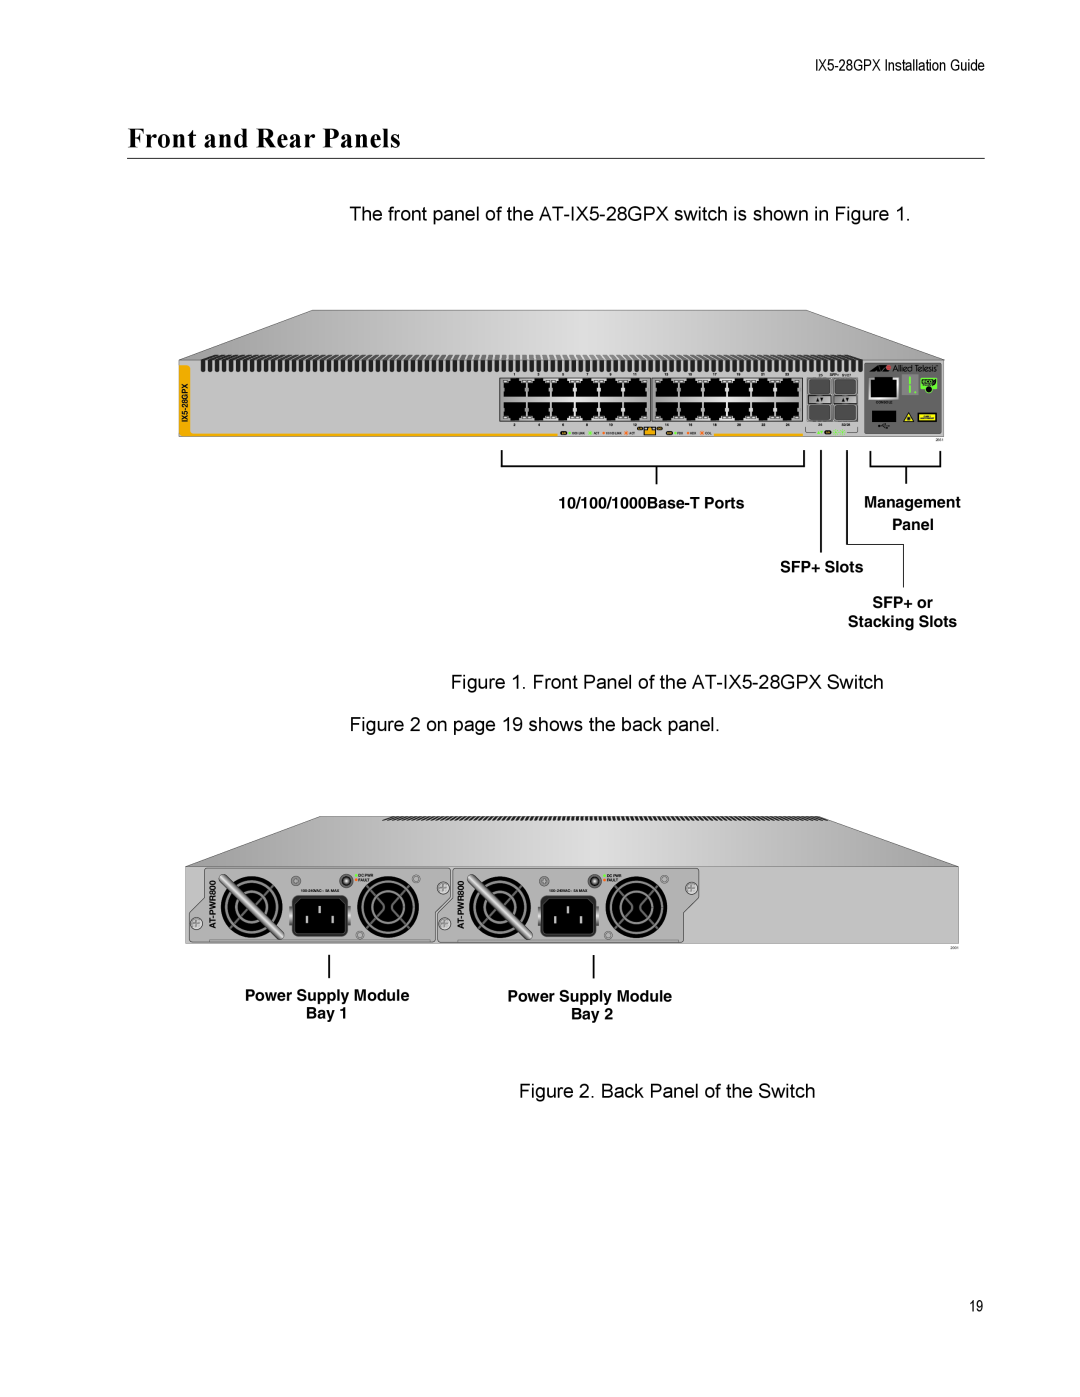 Allied Telesis AT-IX5-28GPX Front and Rear Panels, 10/100/1000Base-T Ports, SFP+ Slots, SFP+ or, Stacking Slots, S2/28 